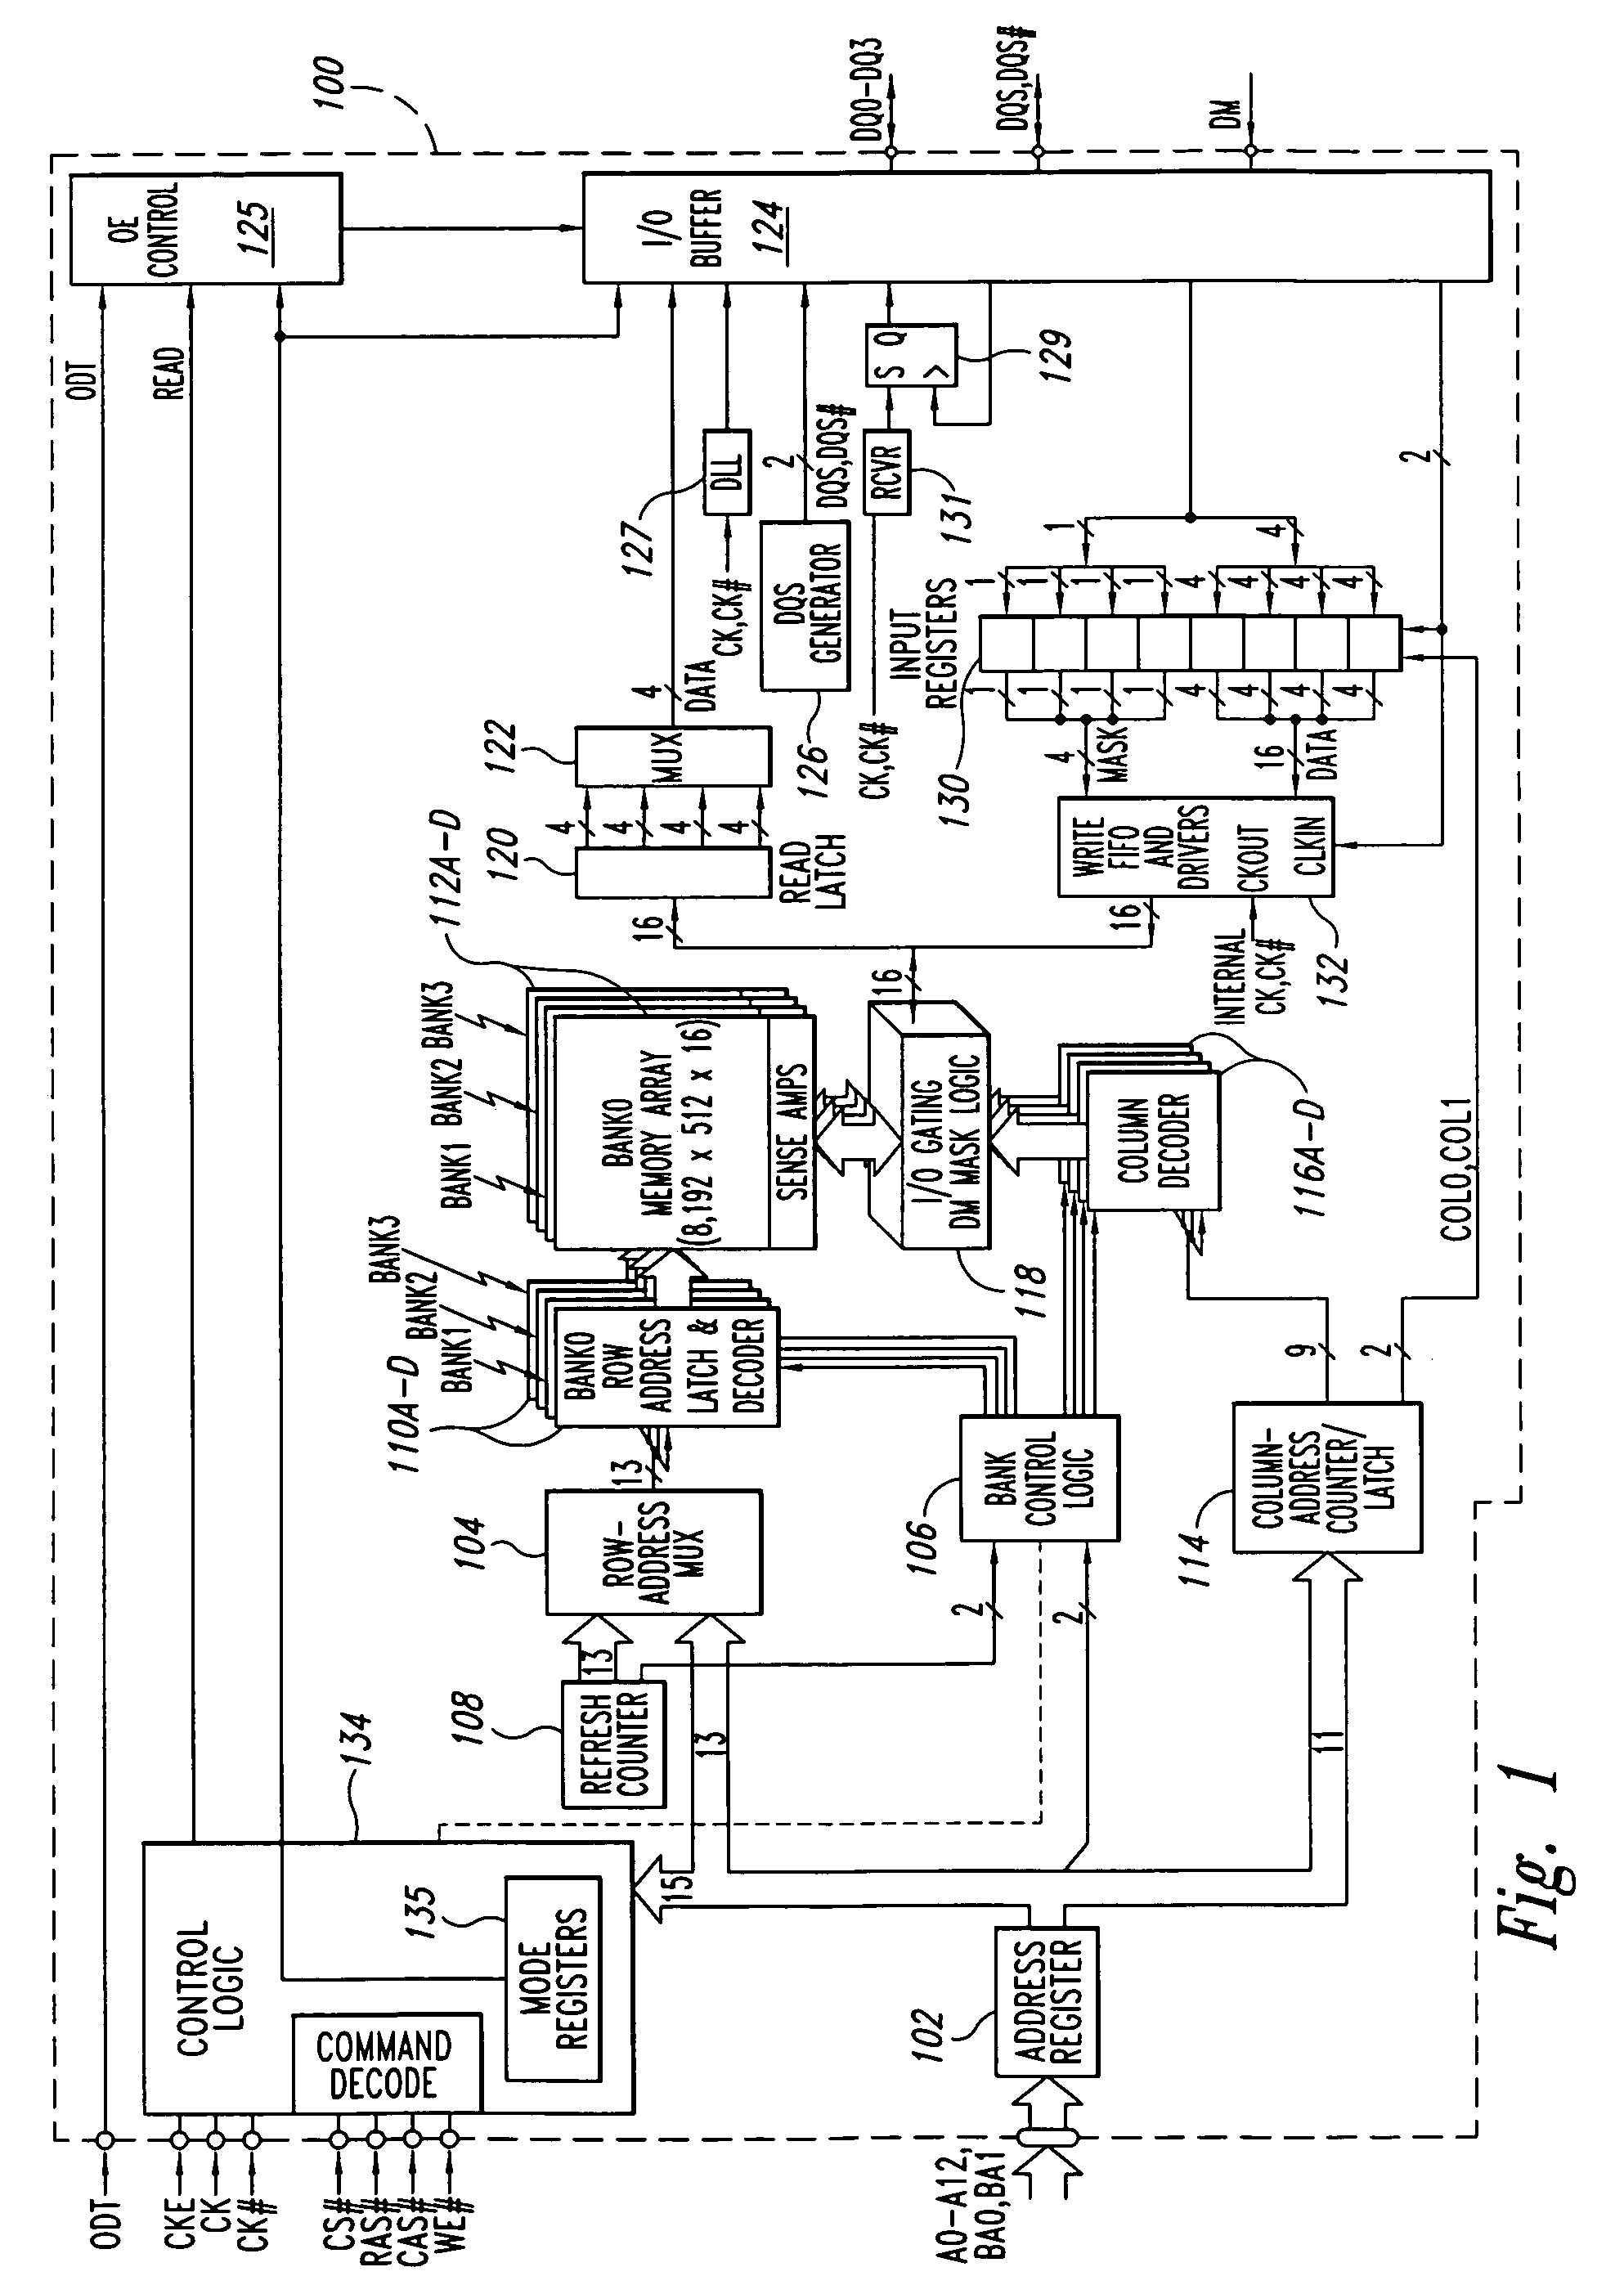 Apparatus and method for independent control of on-die termination for output buffers of a memory device